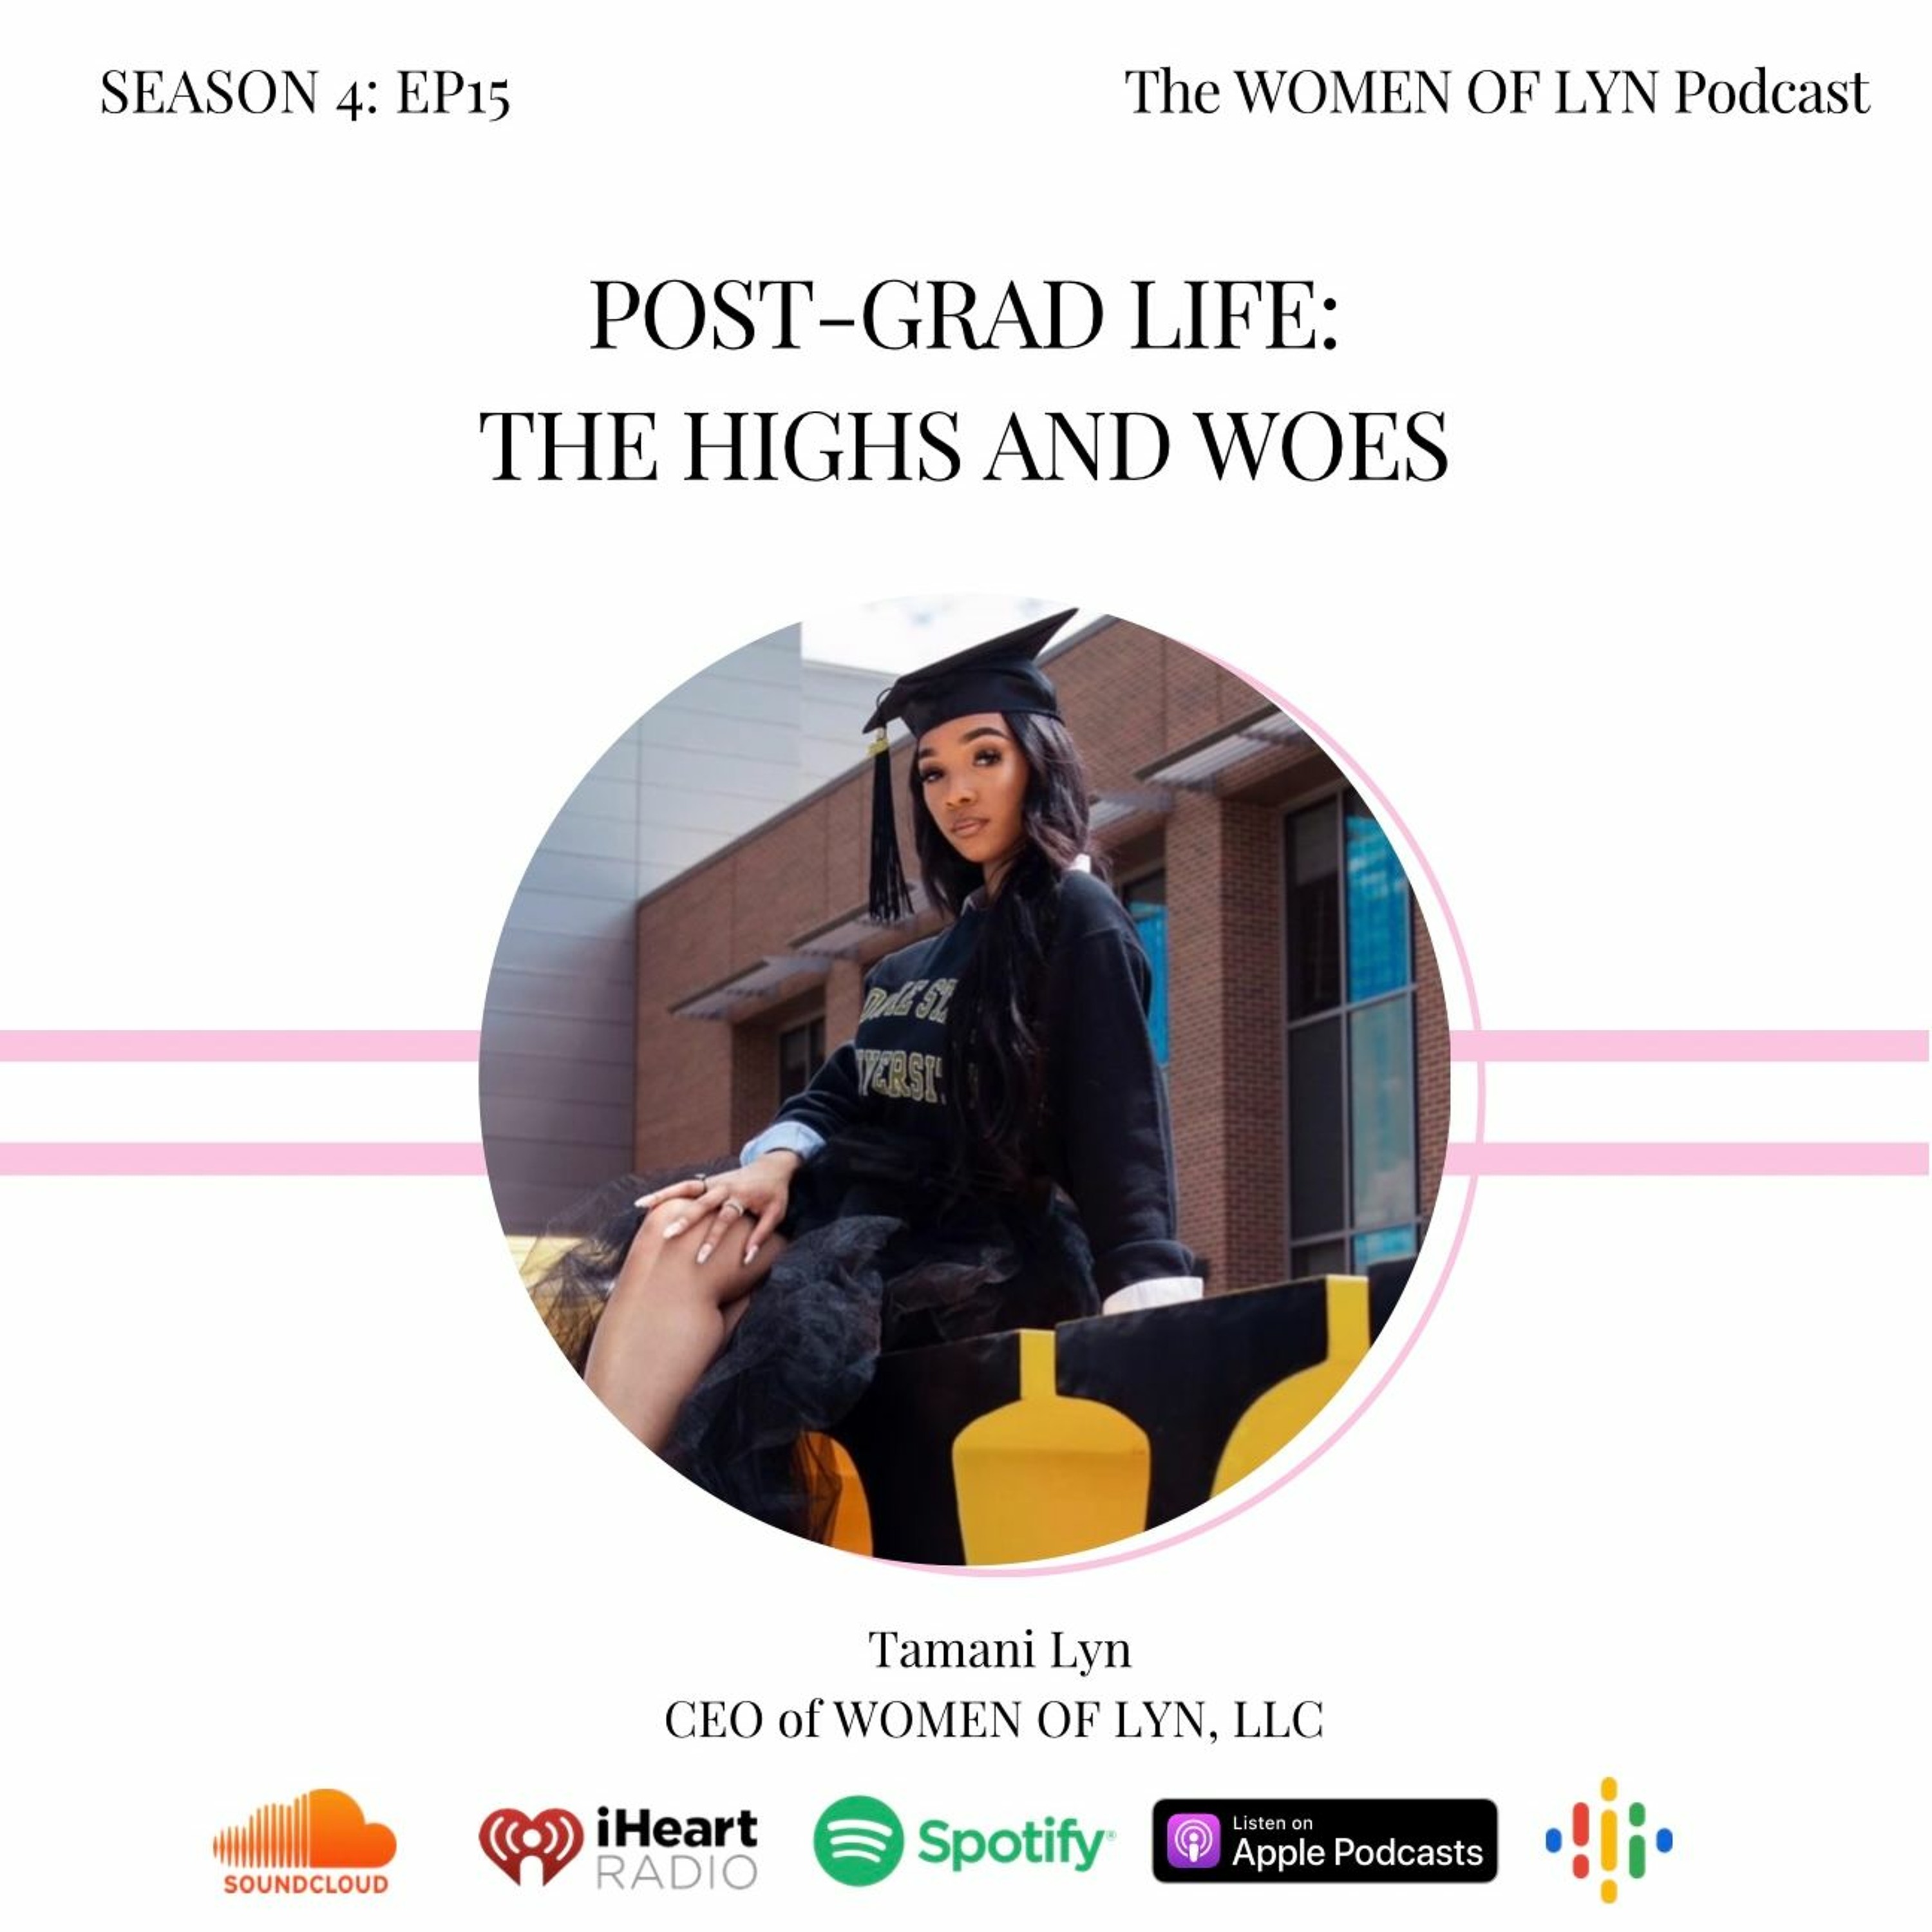 Episode 15: ’Post-Grad Life: The Highs and Woes’